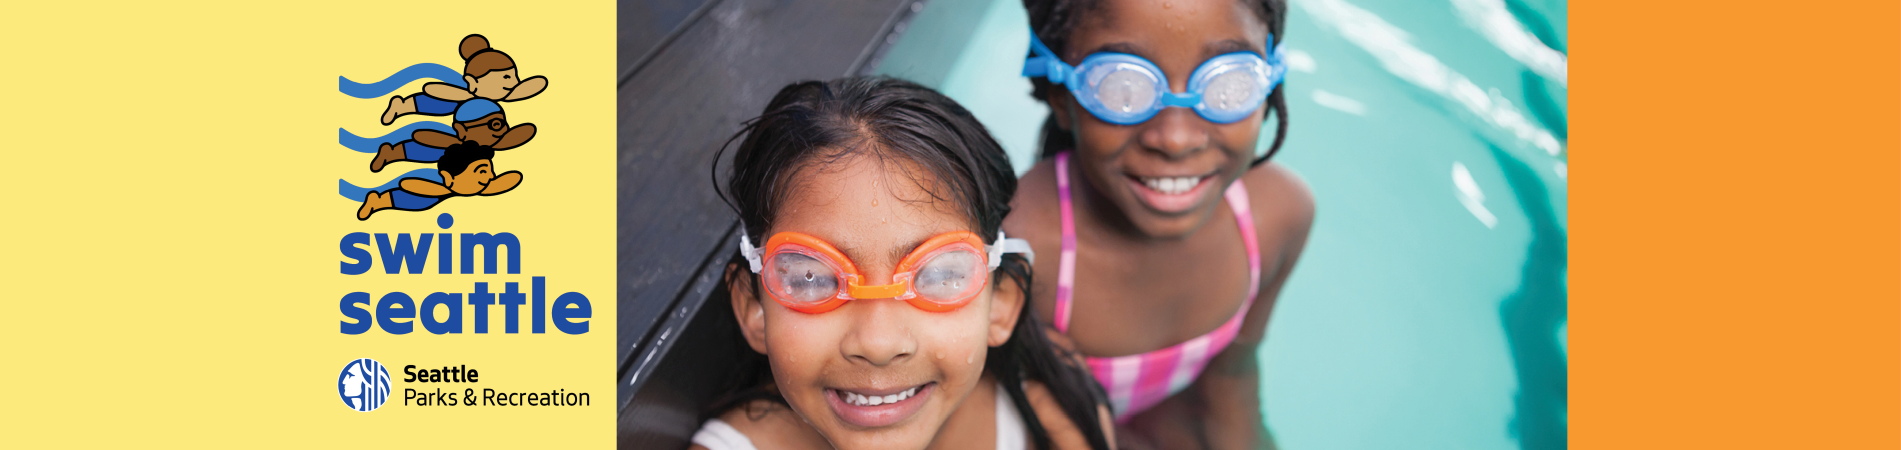 two children in a pool wearing goggles, with a yellow and orange background